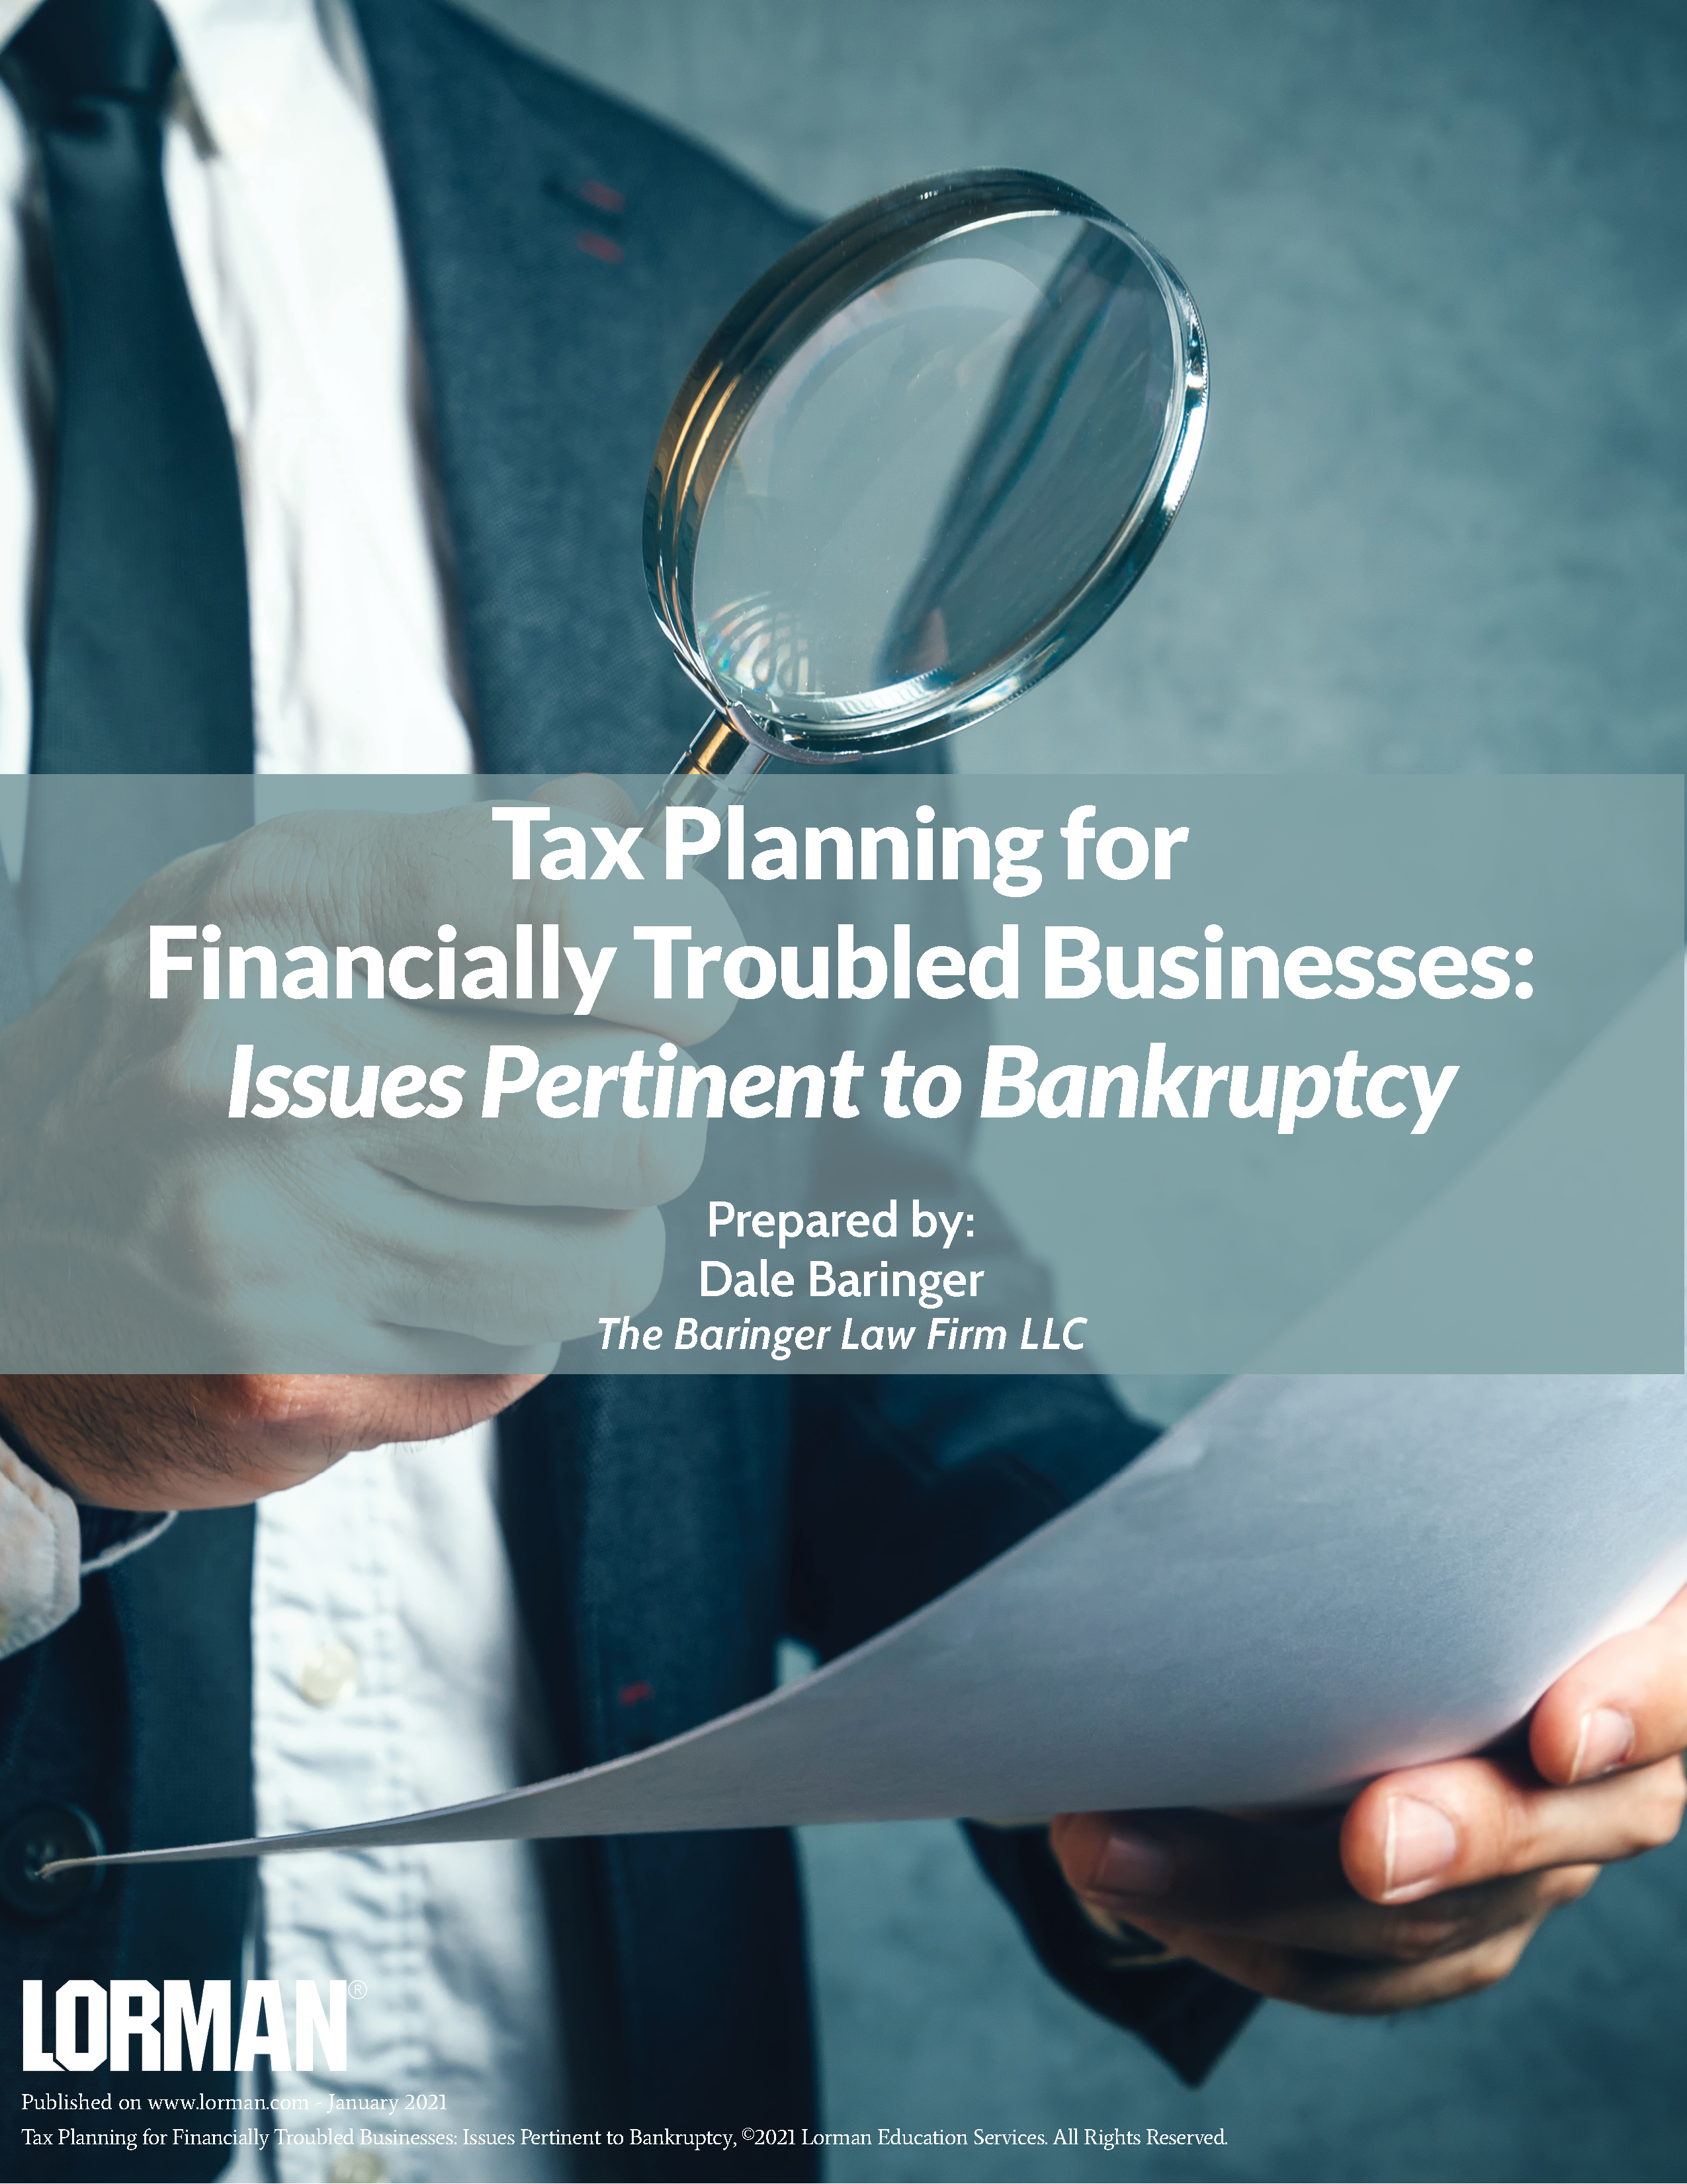 Tax Planning for Financially-Trouble Businesses: Issues Pertinent to Bankruptcy